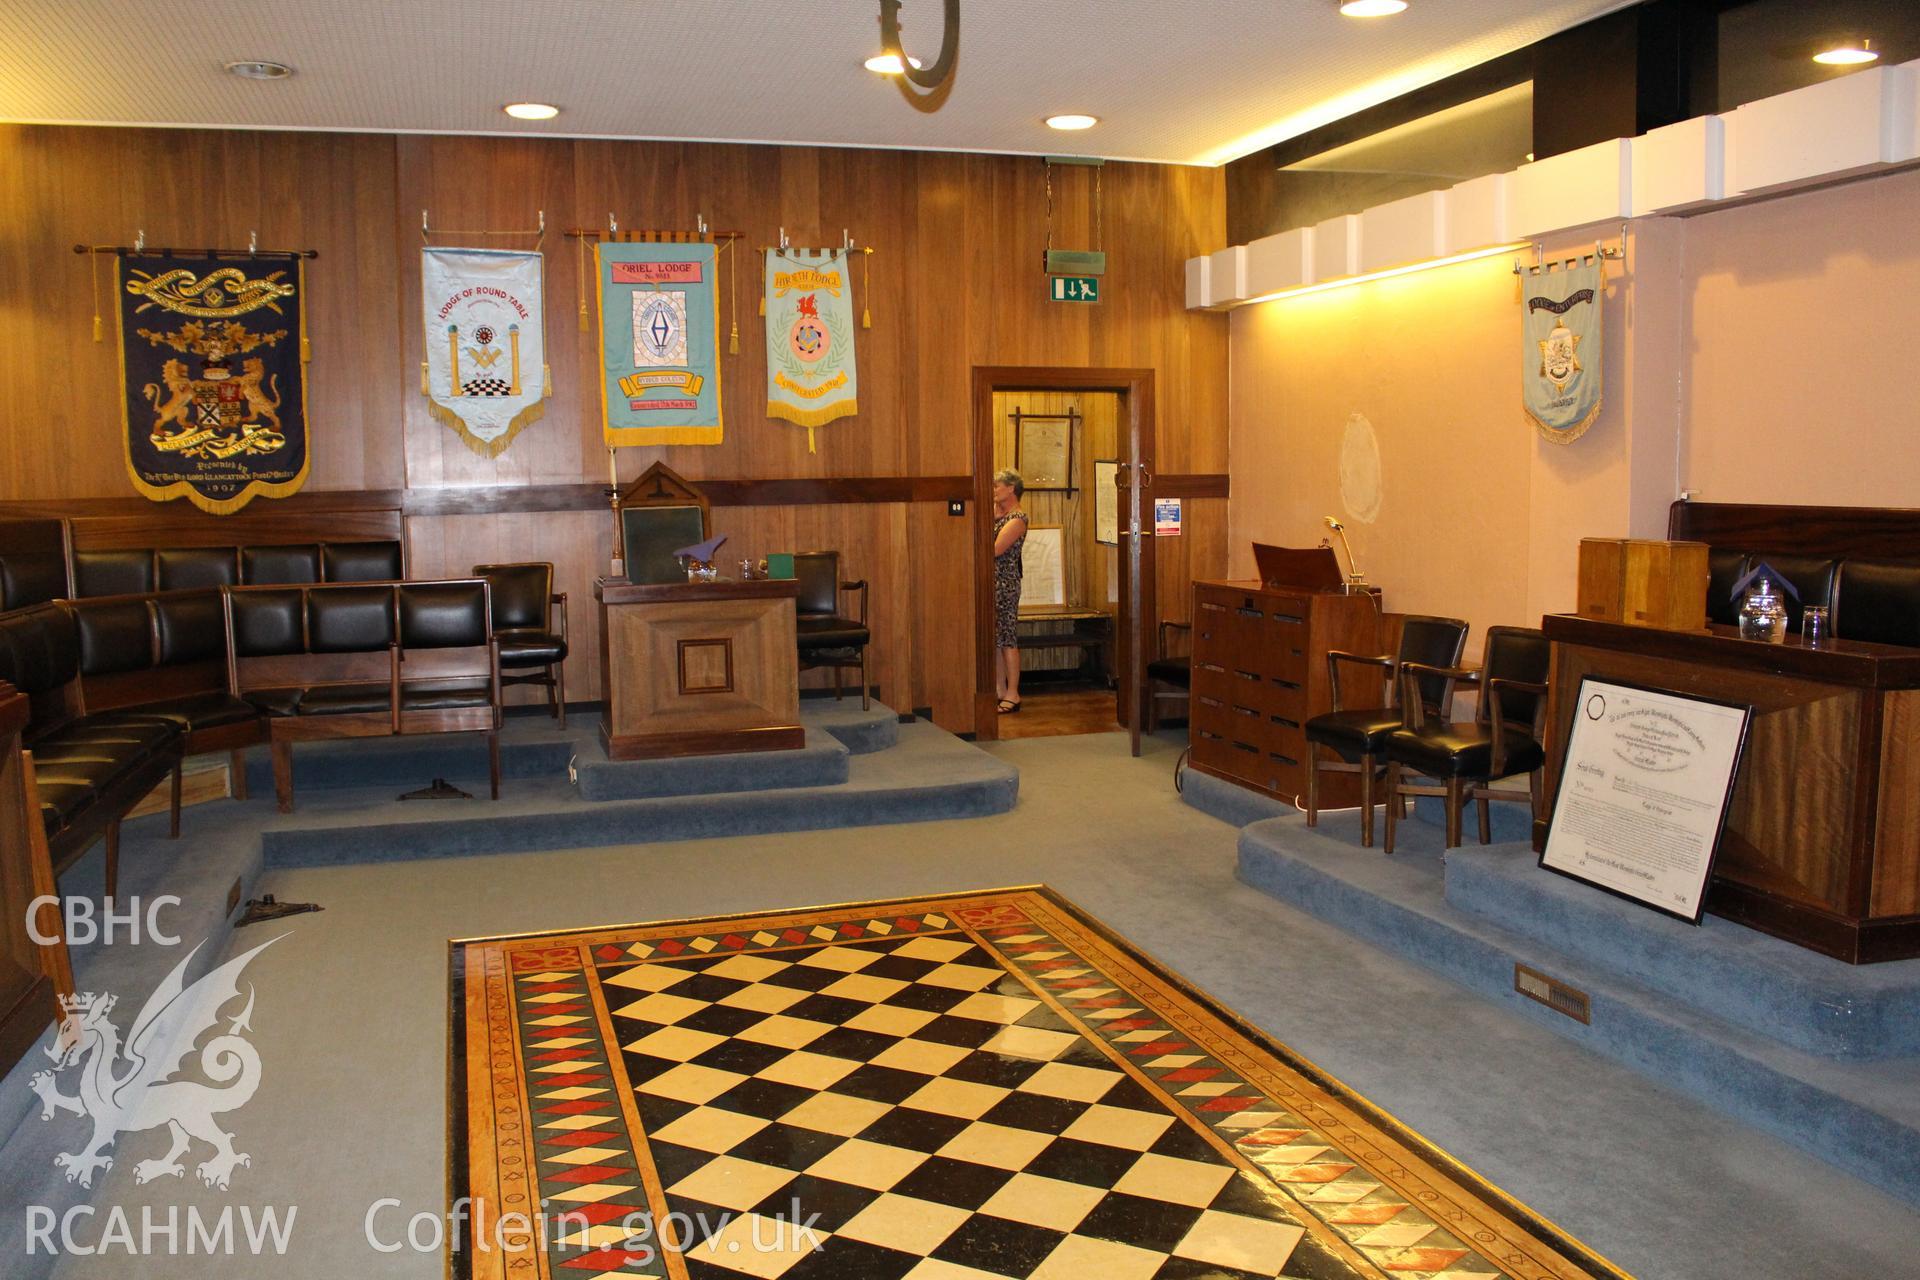 Interior view showing decorative floor at former United Free Methodist Church, now a Masonic Temple, in Cardiff. Photograph taken during survey conducted by Sue Fielding of the RCAHMW, 11th March 2019.